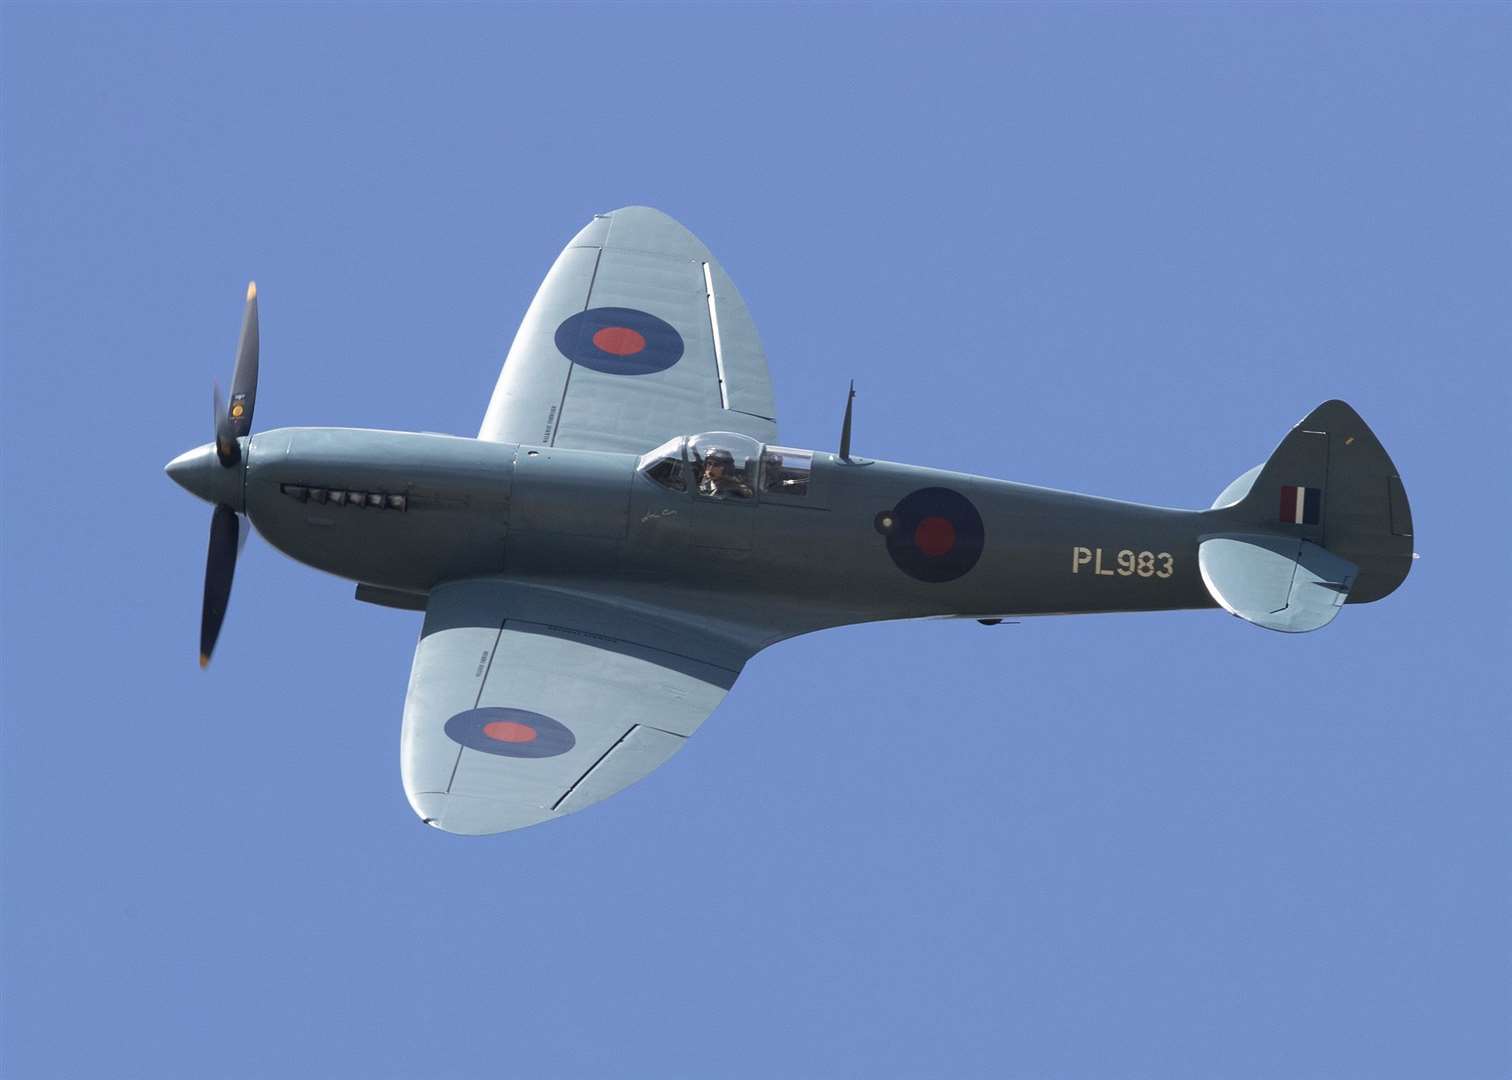 The spitfire has been to Kent once before. Photo: Tim Gutsell